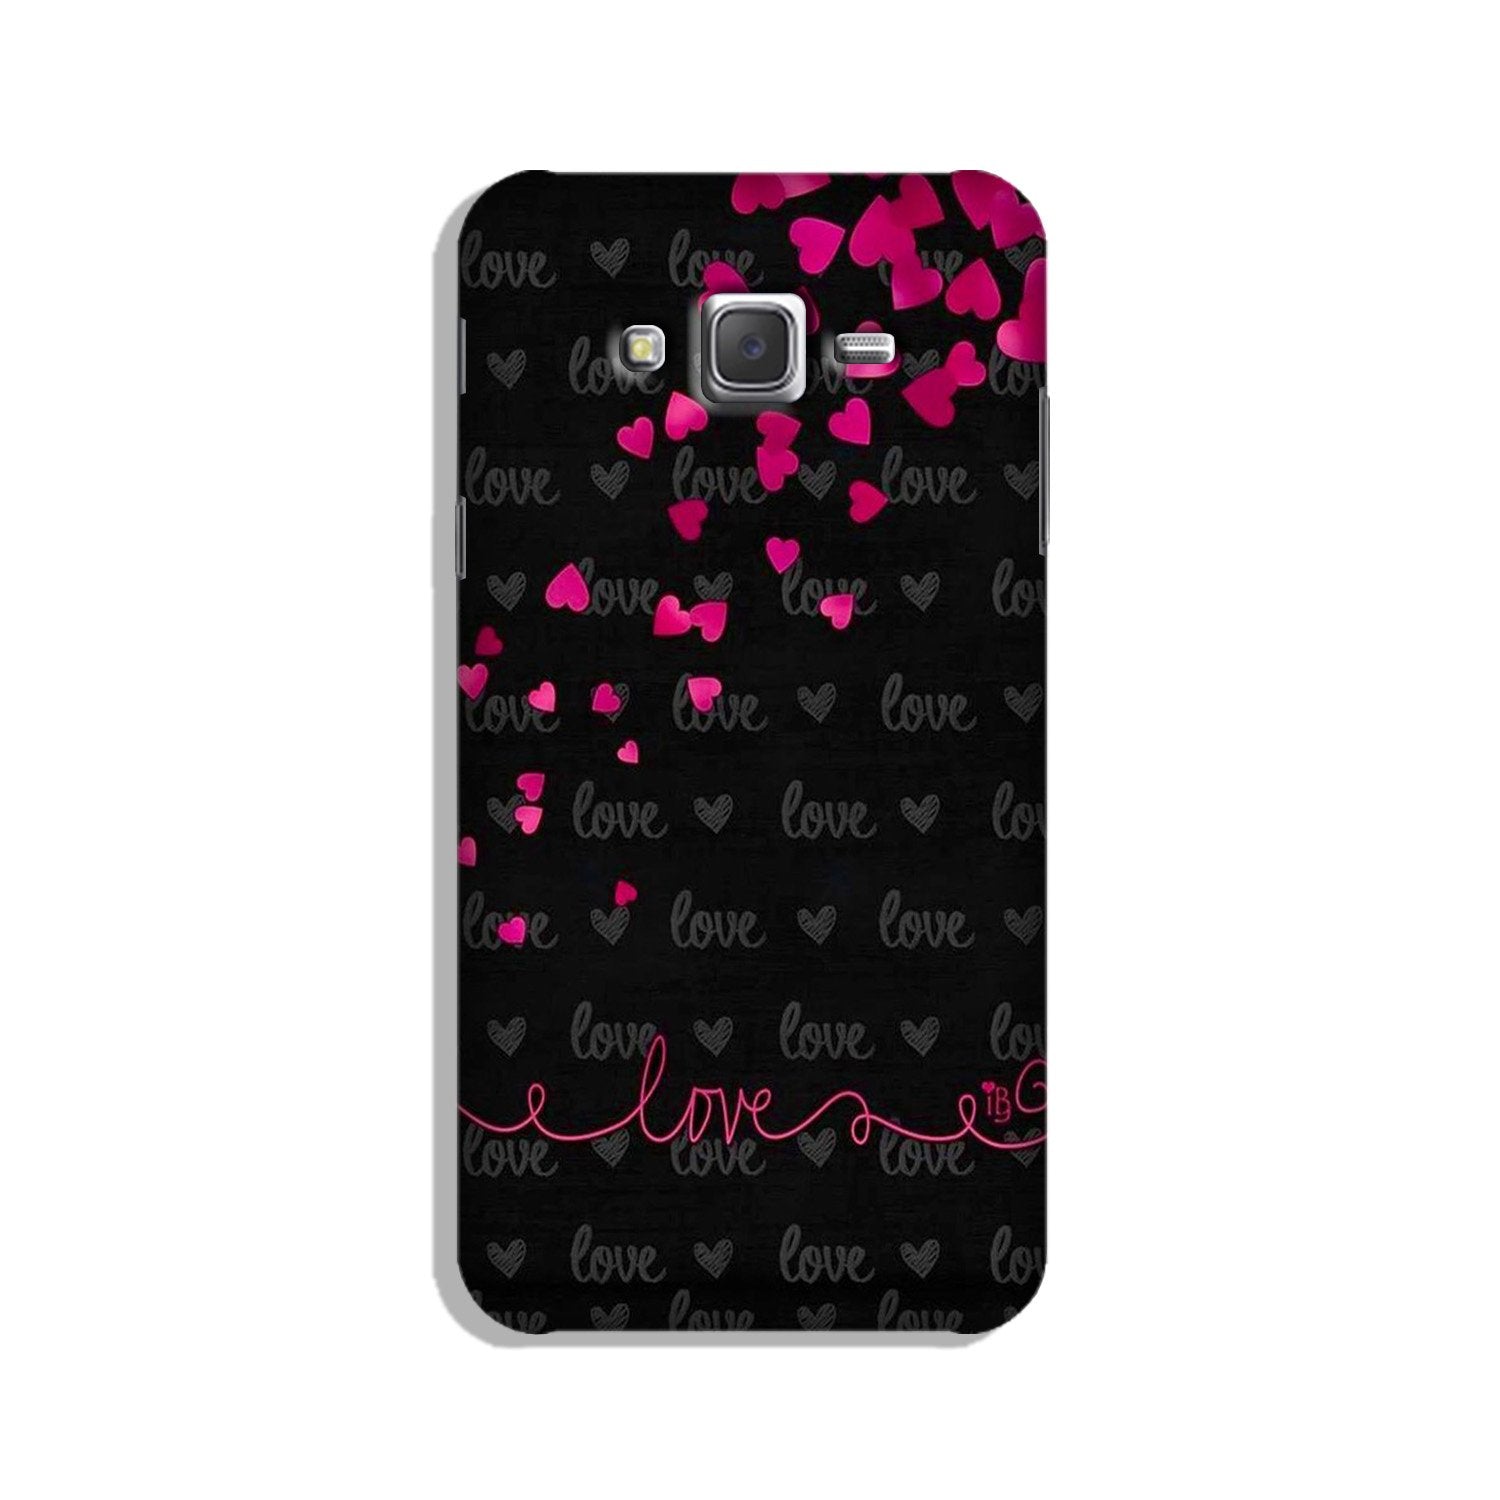 Love in Air Case for Galaxy J5 (2015)